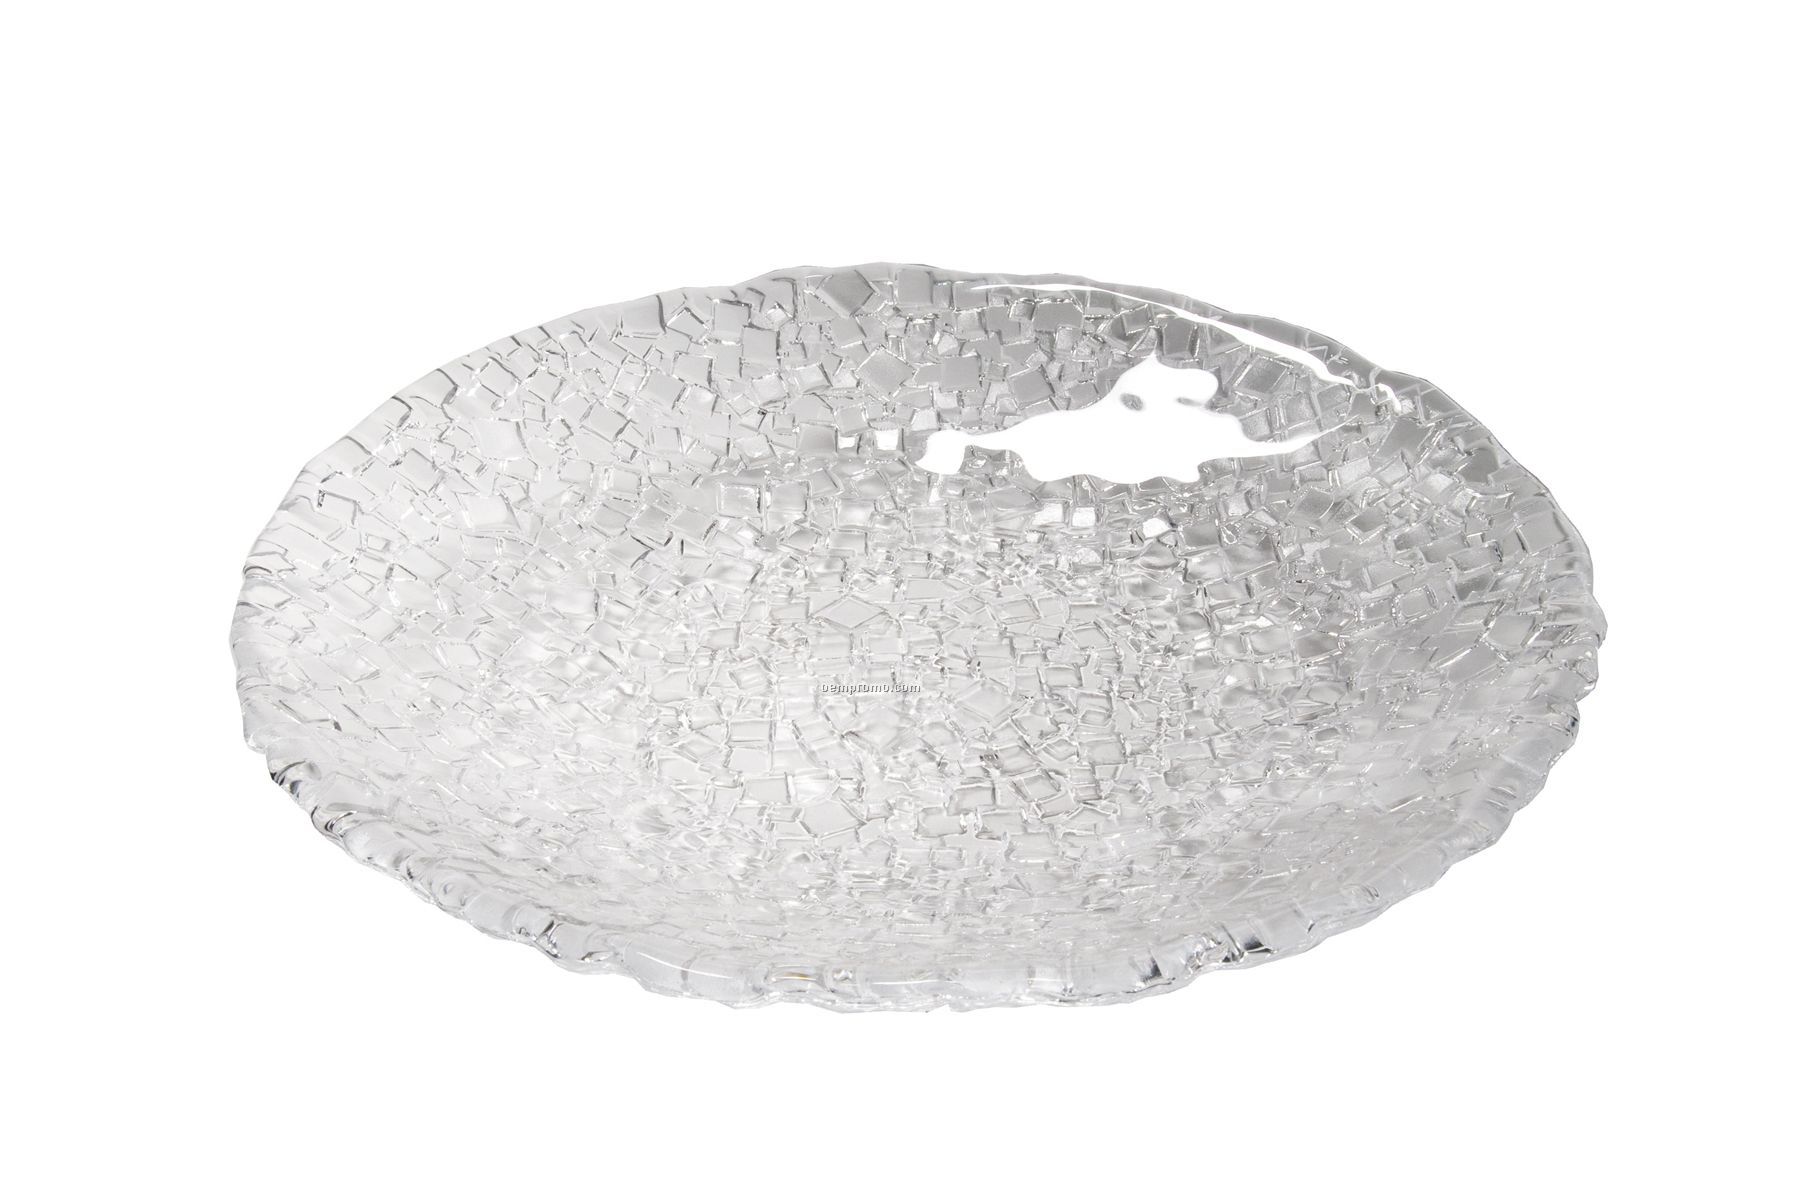 Metropolis Centerpiece Tuscany Glass Collection Dish